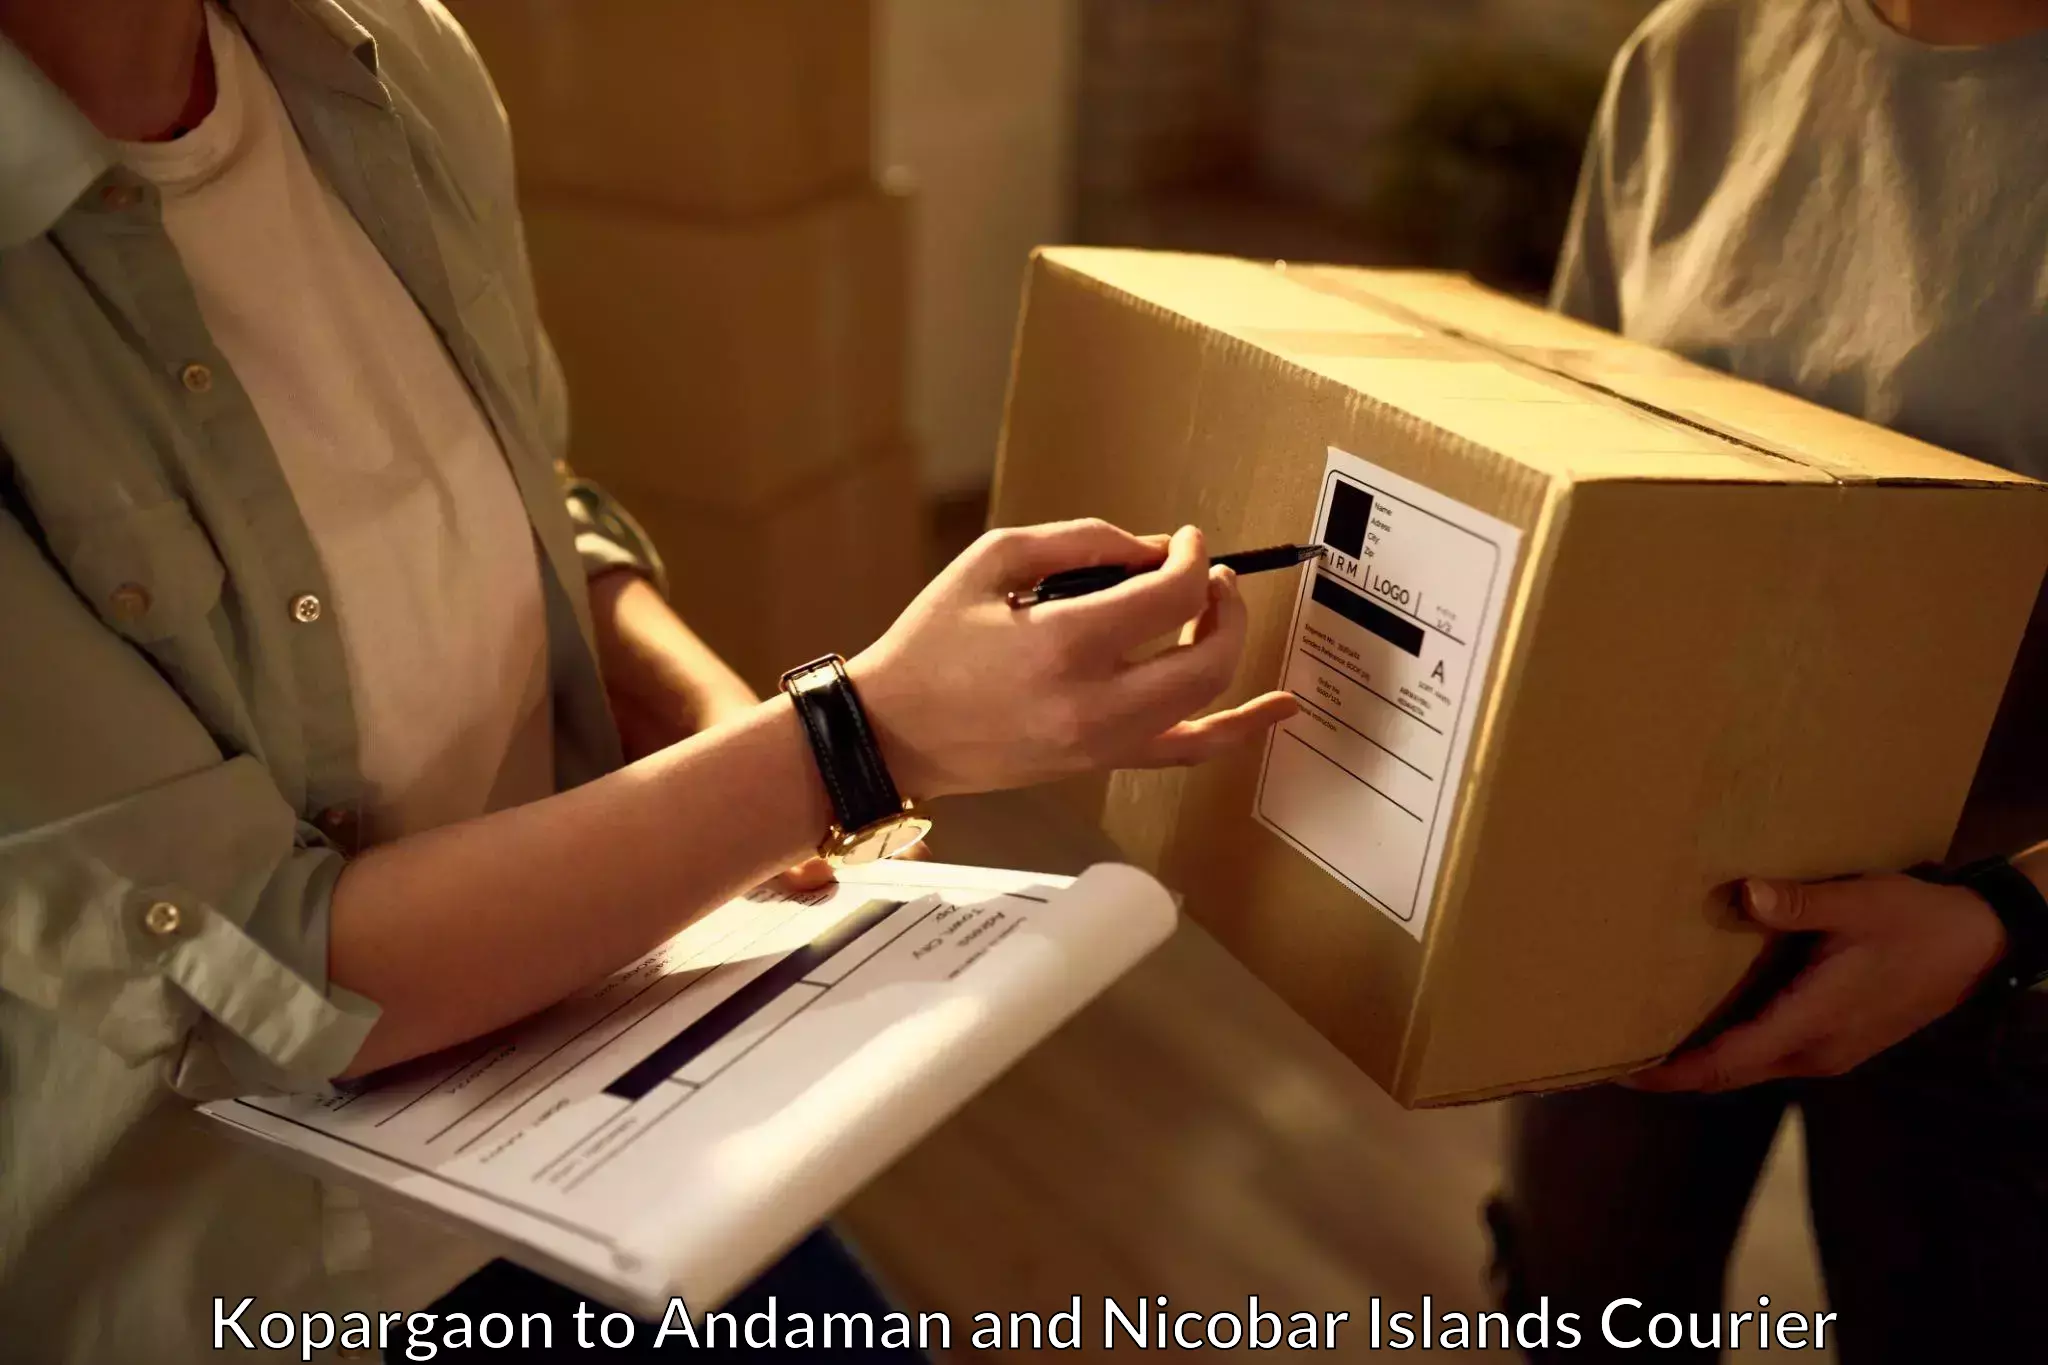 International courier networks Kopargaon to Andaman and Nicobar Islands